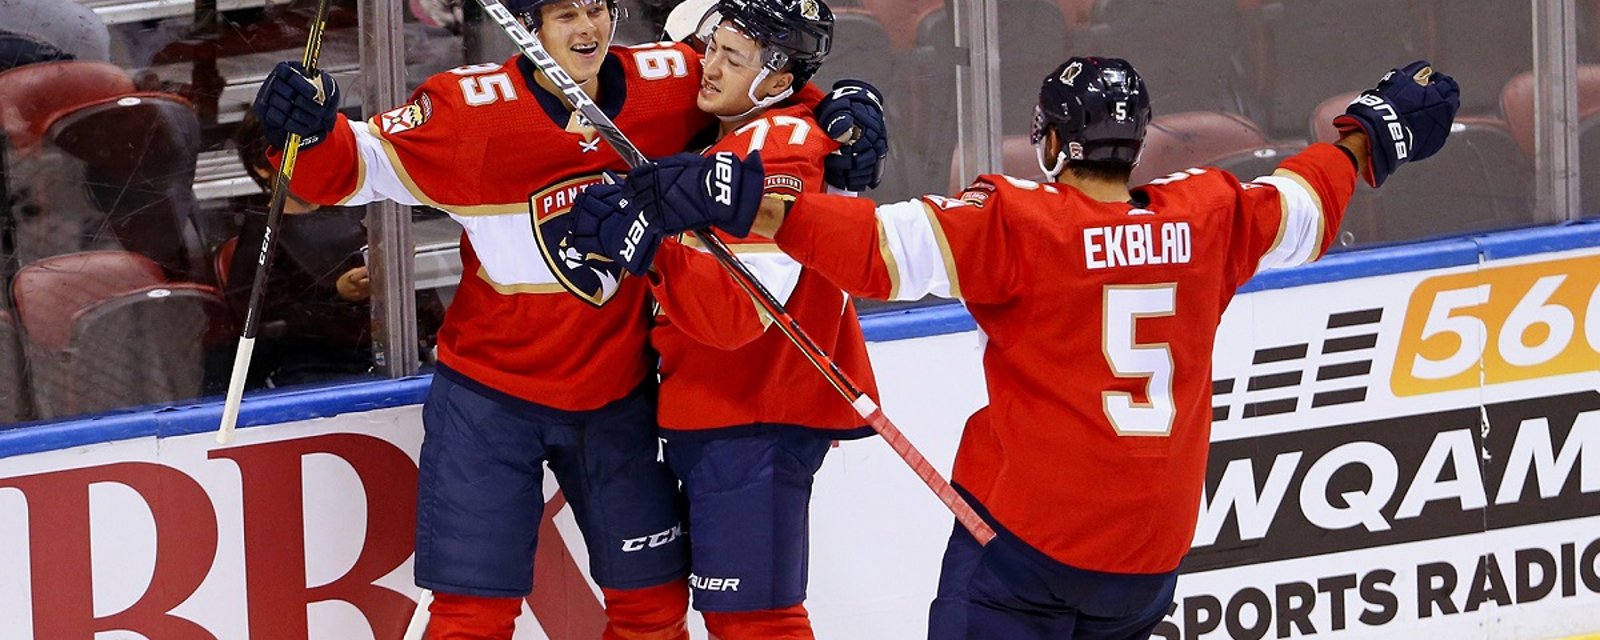 Rumor: Panthers have just made two of their top prospects healthy scratches.